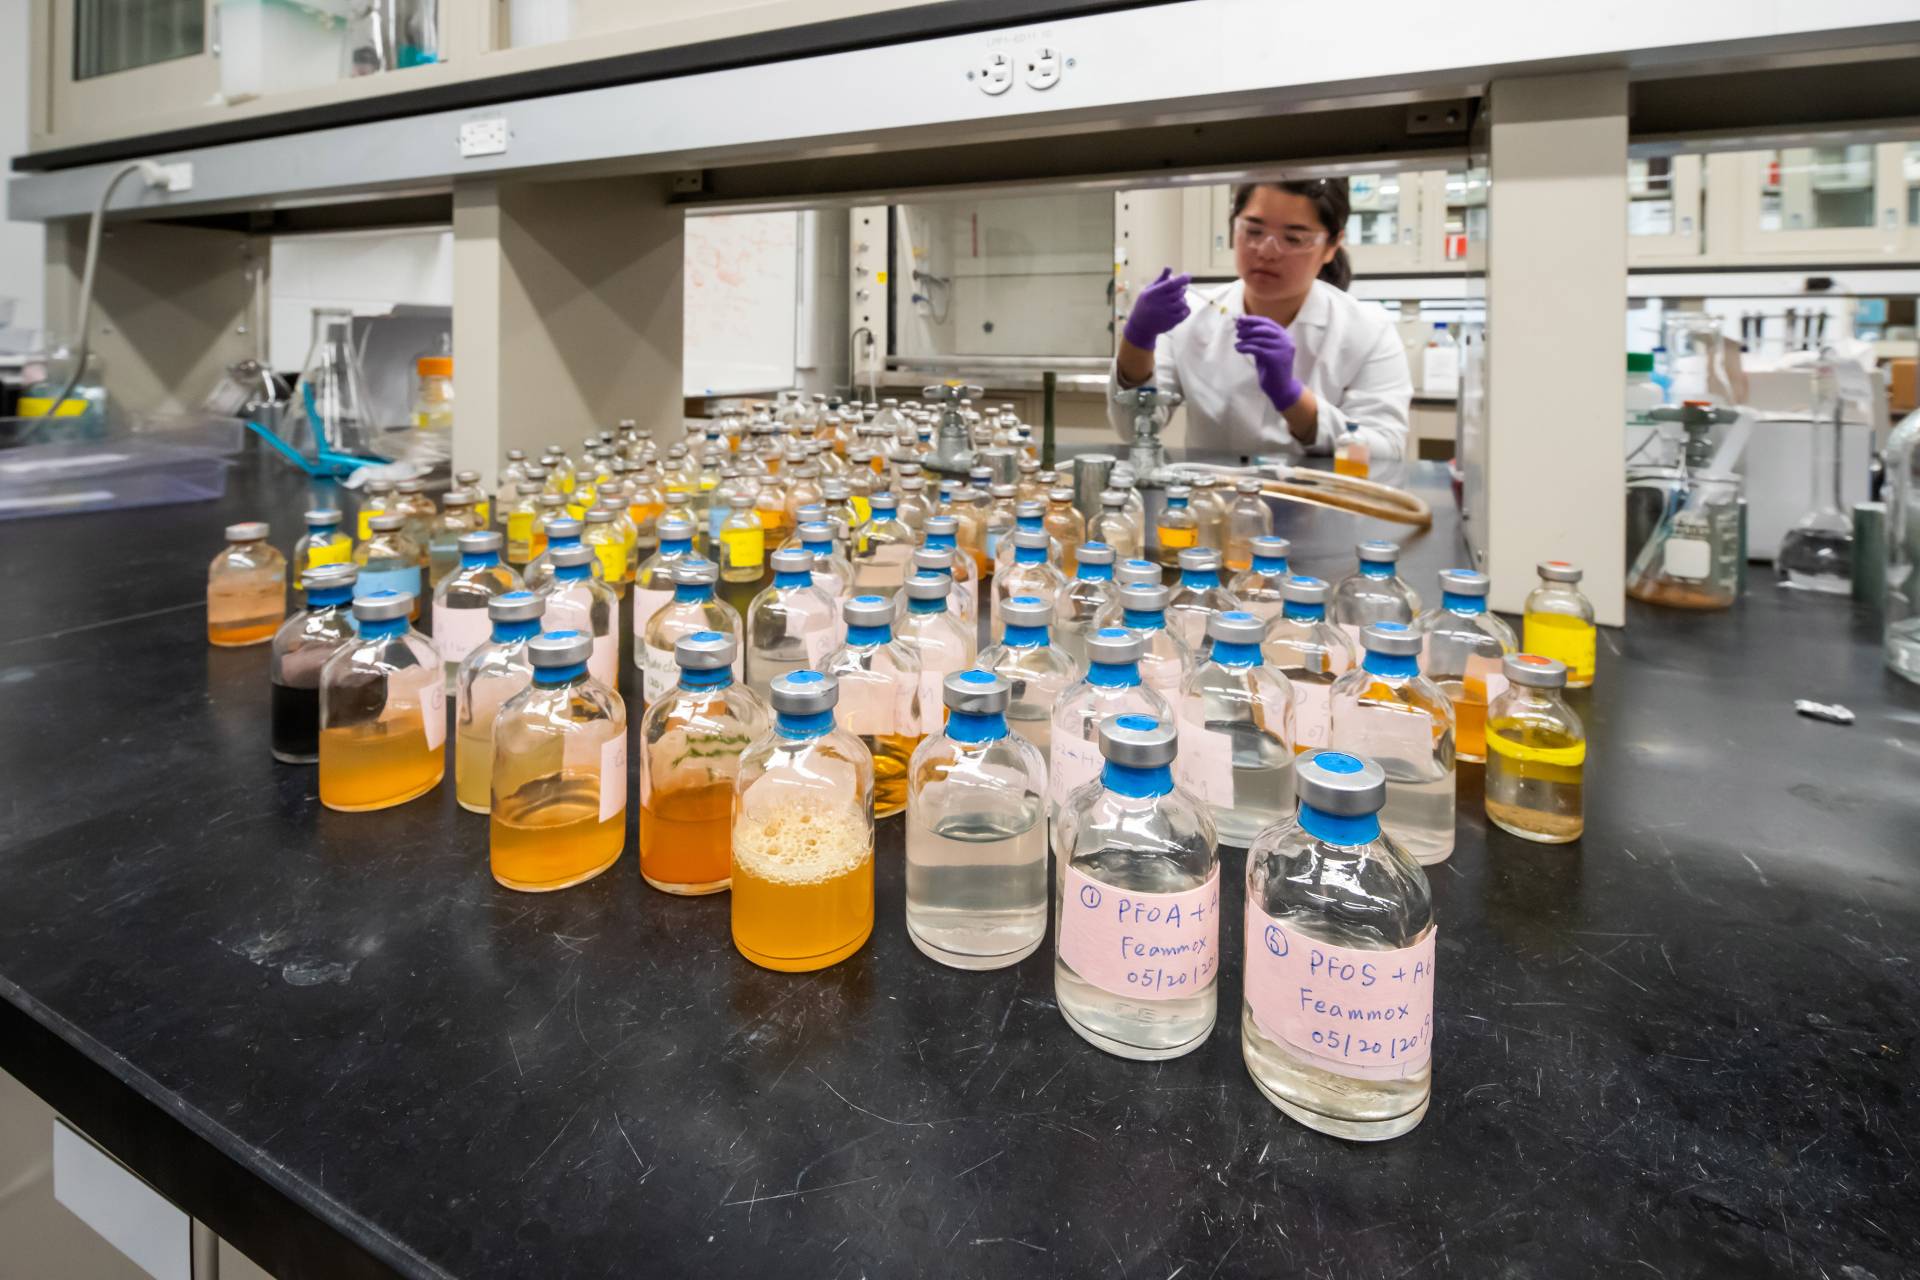 A researcher looks at many bottles of liquid samples